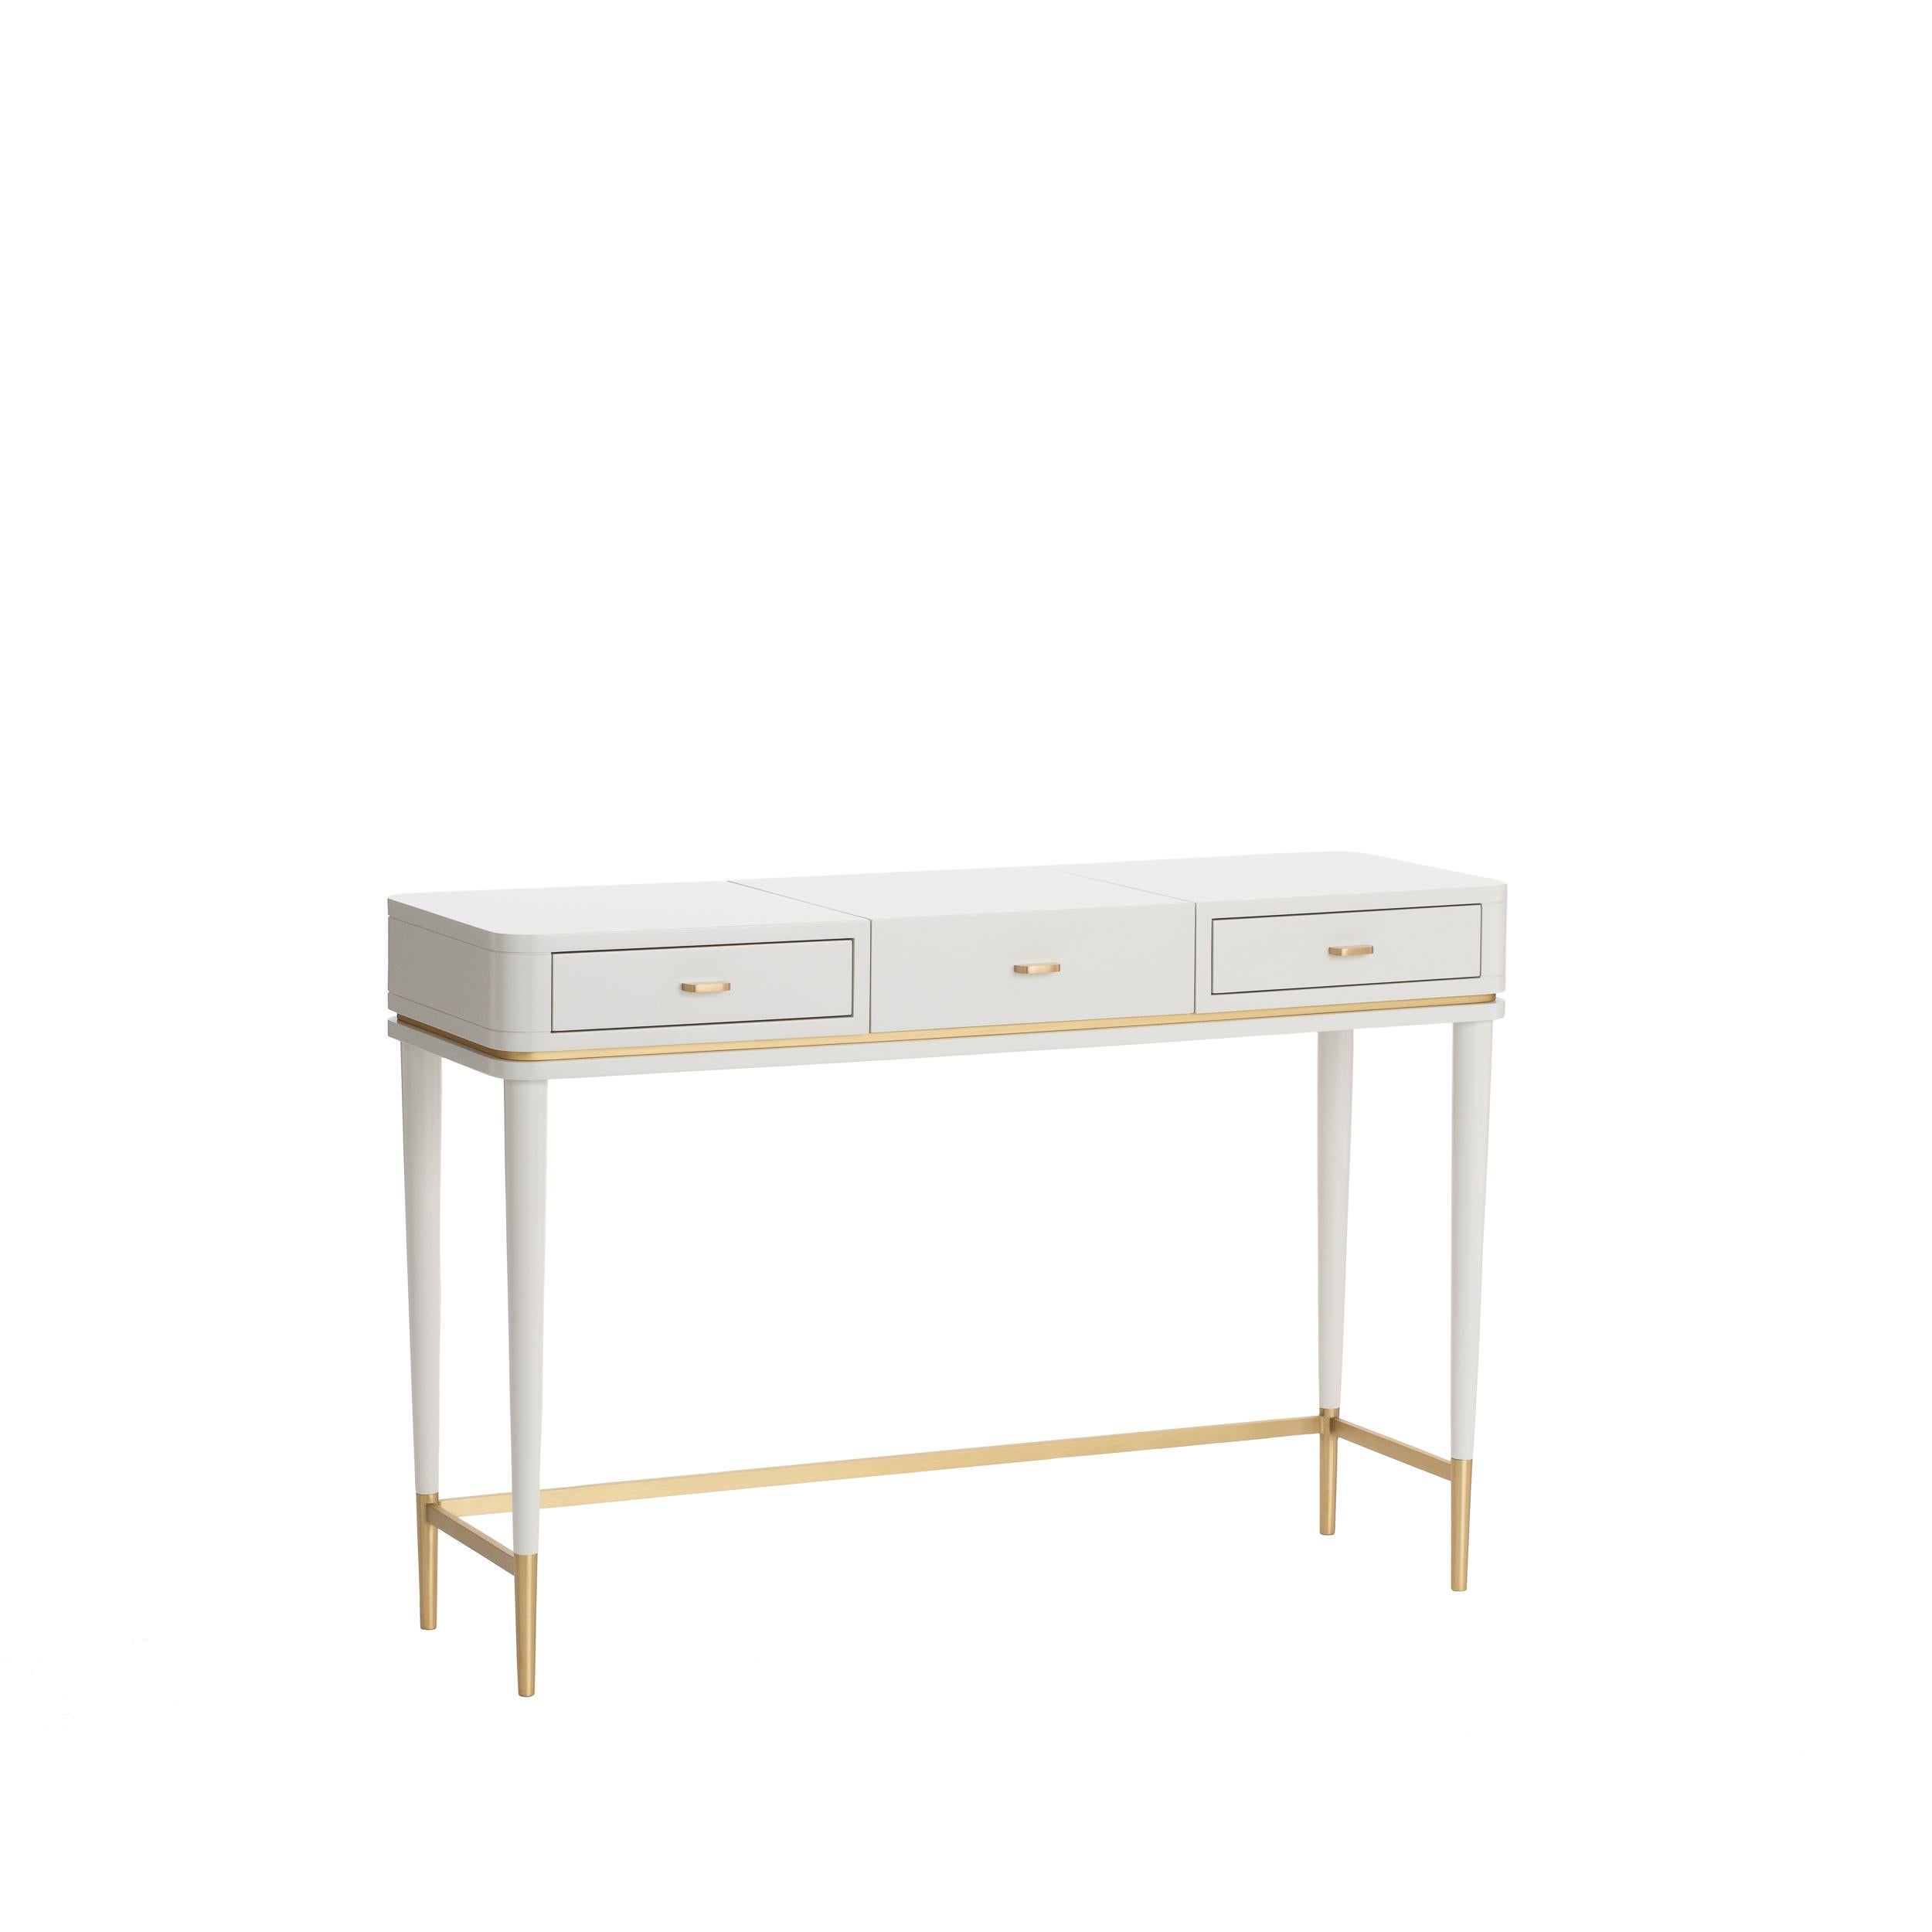 Modern CRIS dressing table with Antique Brass Feet and Handles For Sale